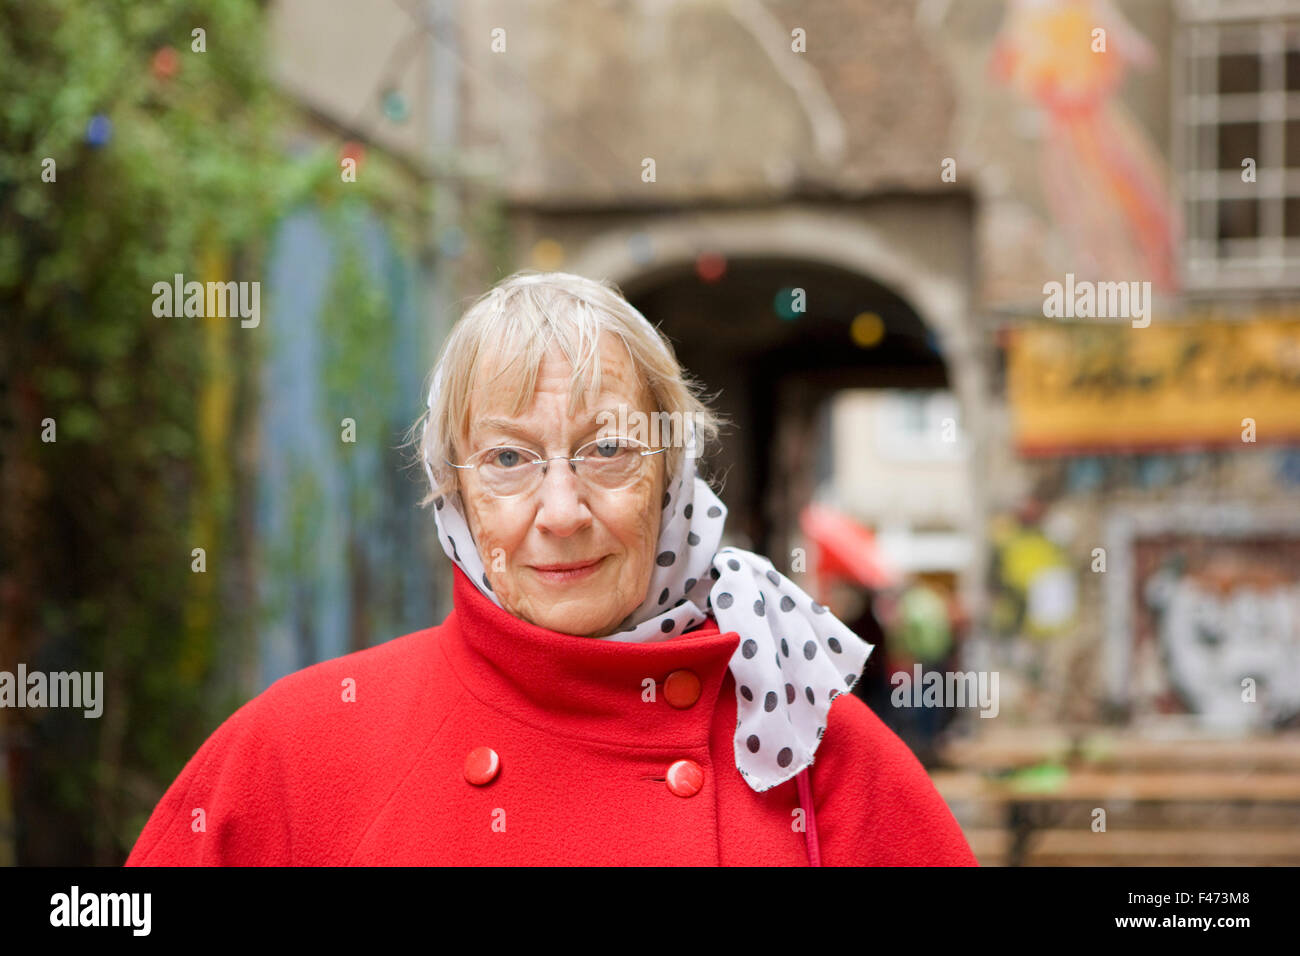 A woman on vacation in Berlin, Germany. Stock Photo